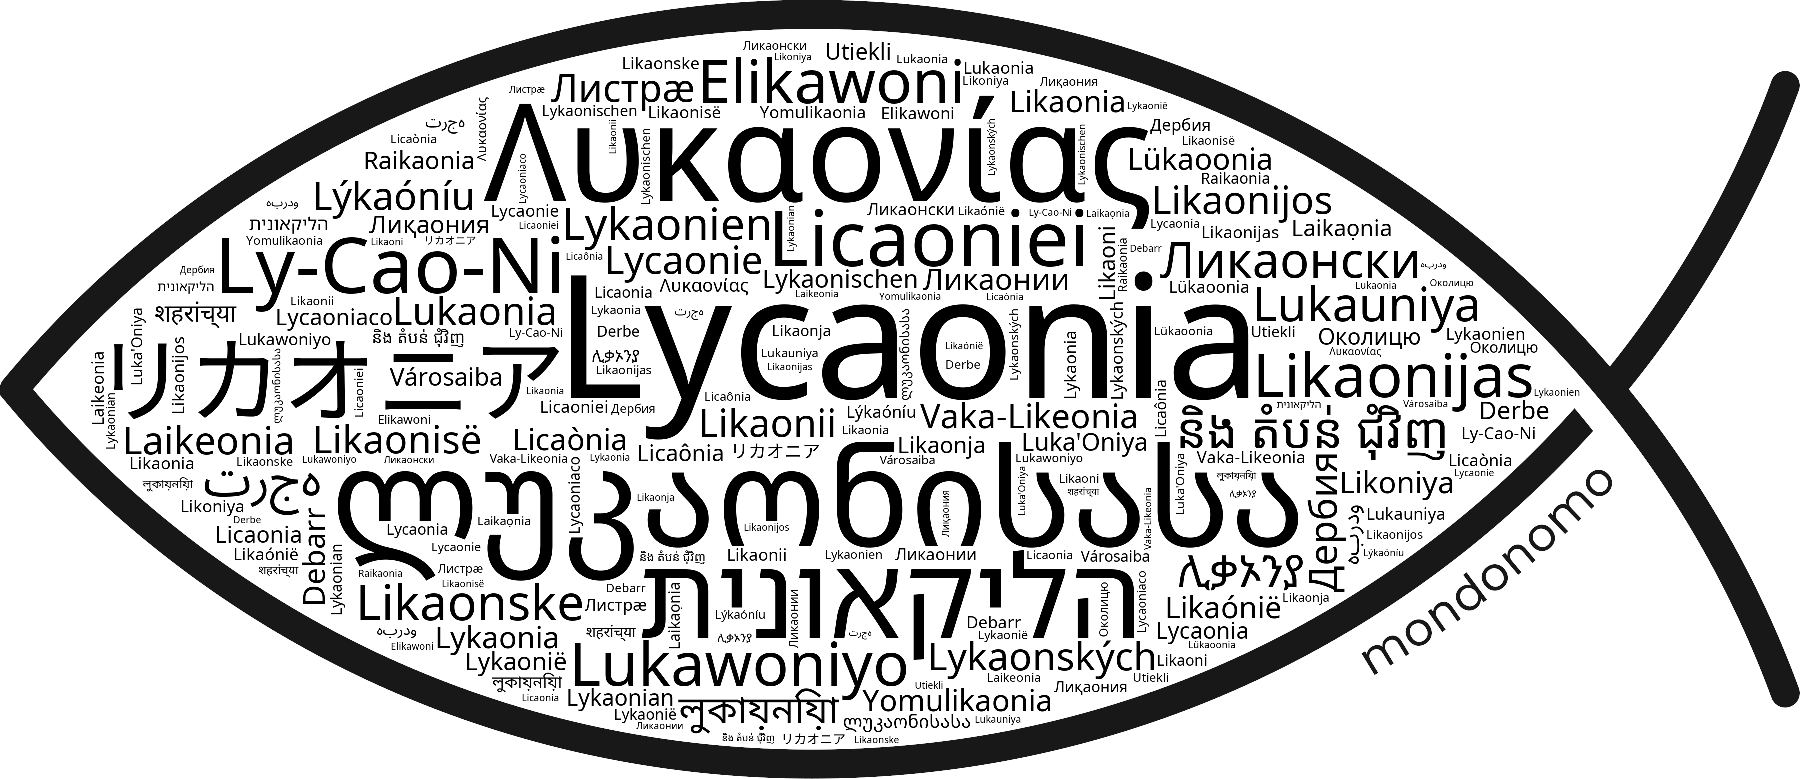 Name Lycaonia in the world's Bibles